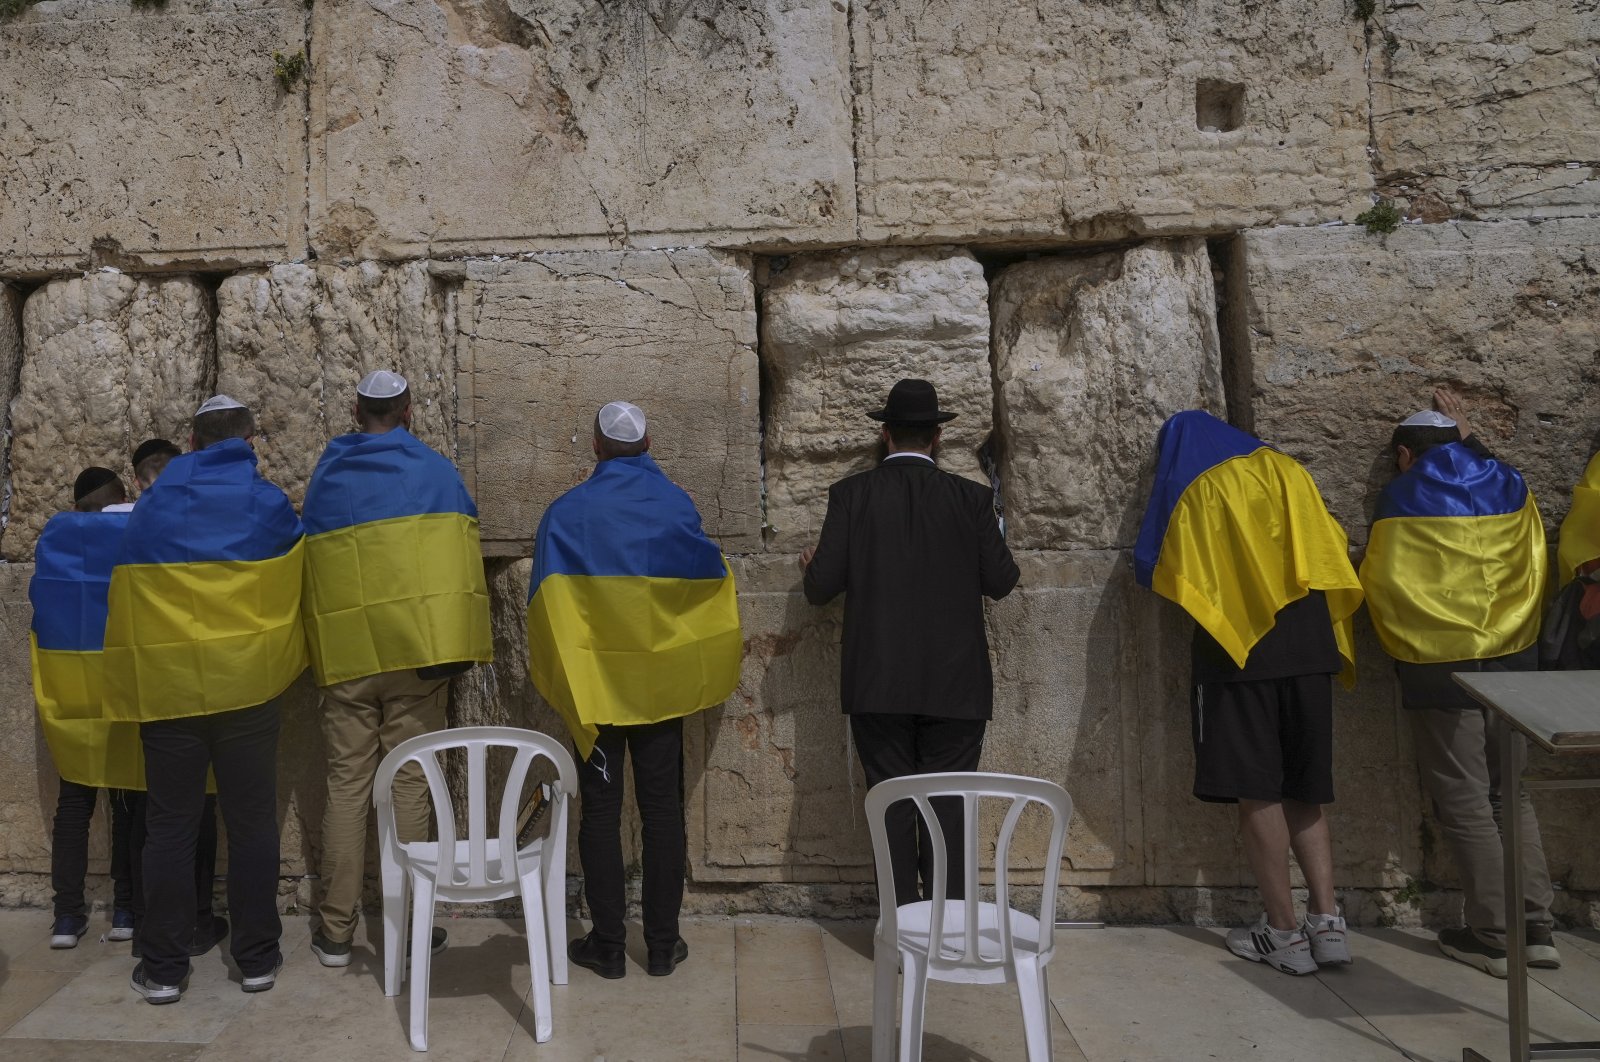 Ukrainian delegation from Kyiv wrapped in Ukrainian flags pray at the Western Wall, the holiest site where Jews can pray in Jerusalem&#039;s Old City, April 1, 2022. (AP Photo)